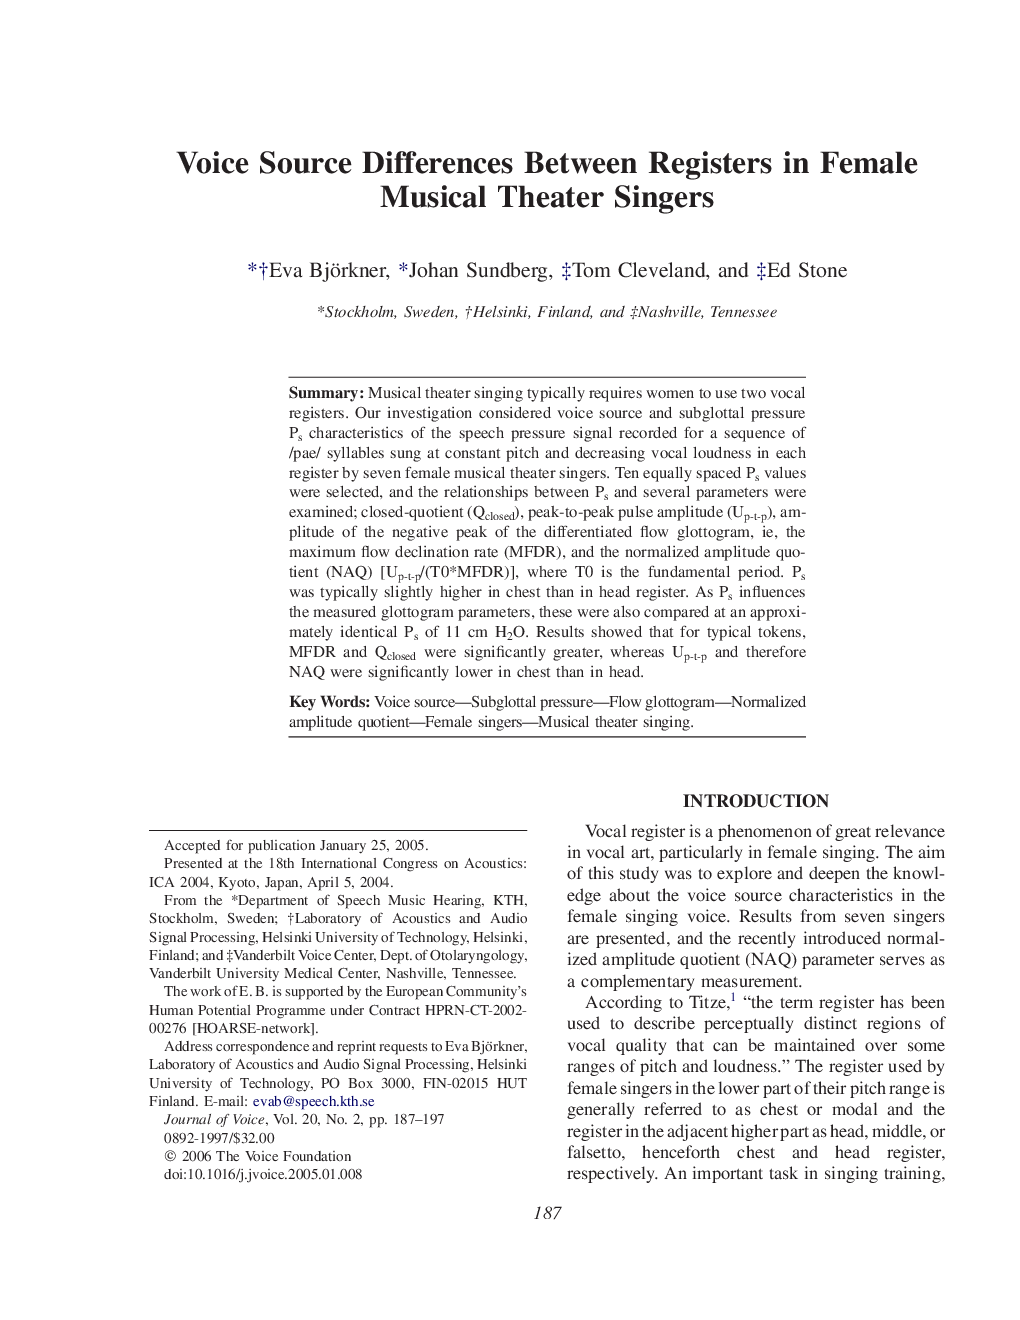 Voice Source Differences Between Registers in Female Musical Theater Singers 